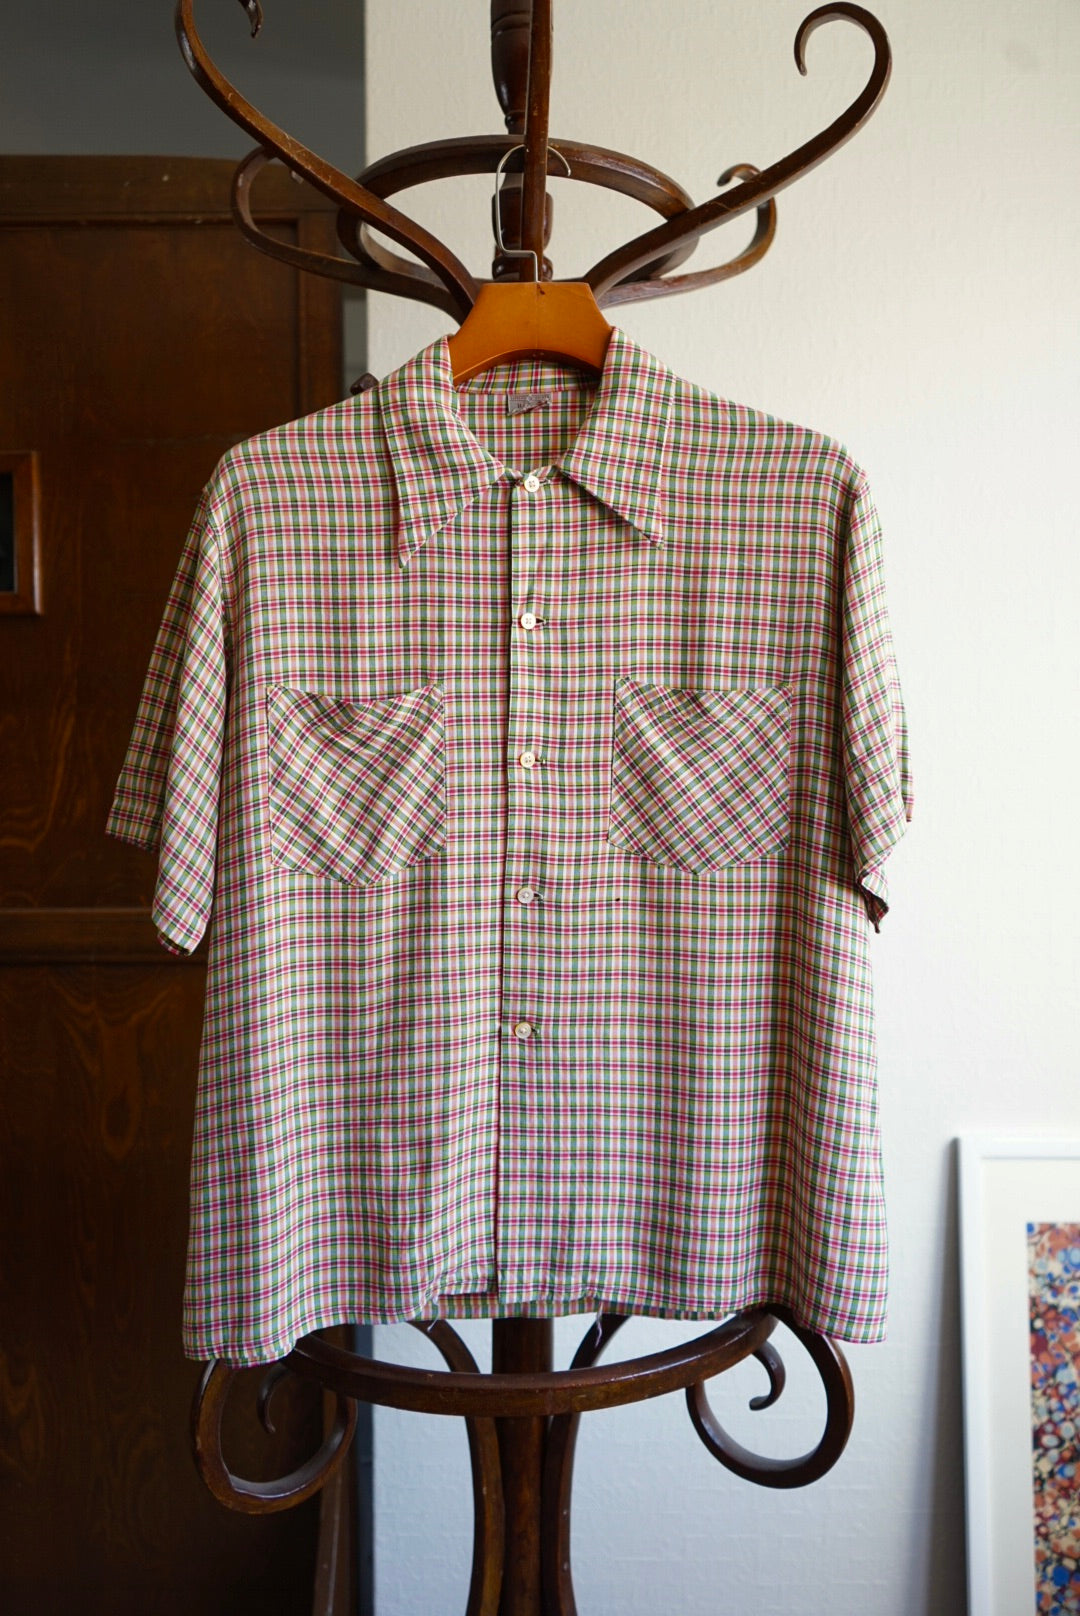 1950s HORNE Brothers Rayon Leisure Shirts Made in ENGLAND